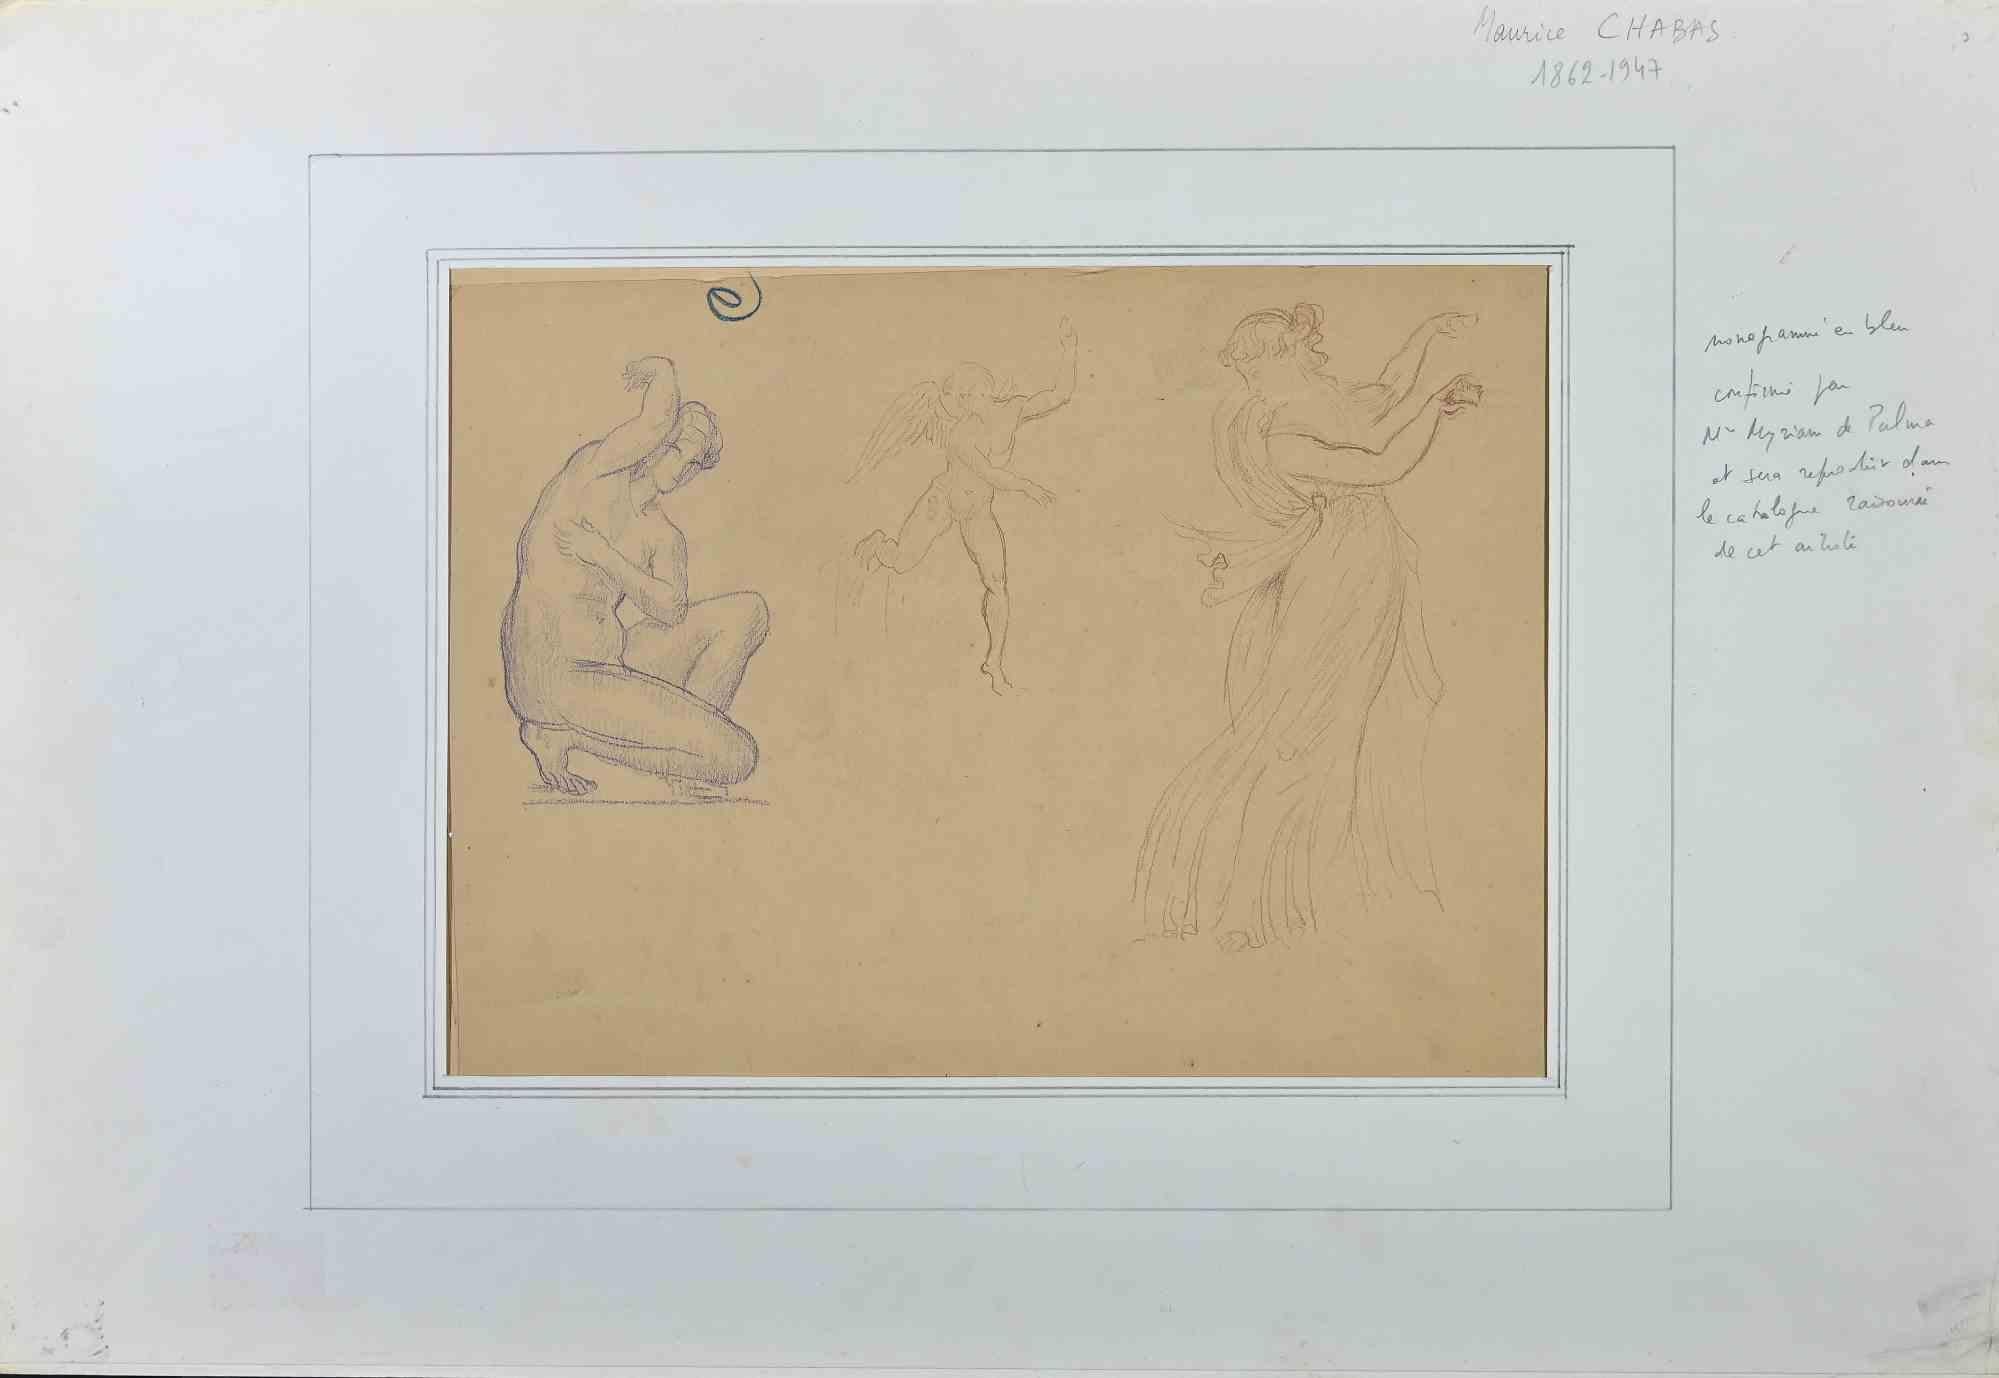 Figures is an Original Pencil Drawing realized by Maurice Chabas (1862-1947).

The artwork is in good condition.

Maurice Chabas (21 September 1862, Nantes – 11 December 1947, Versailles) was a French Symbolist painter. Chabas was a prolific artist,